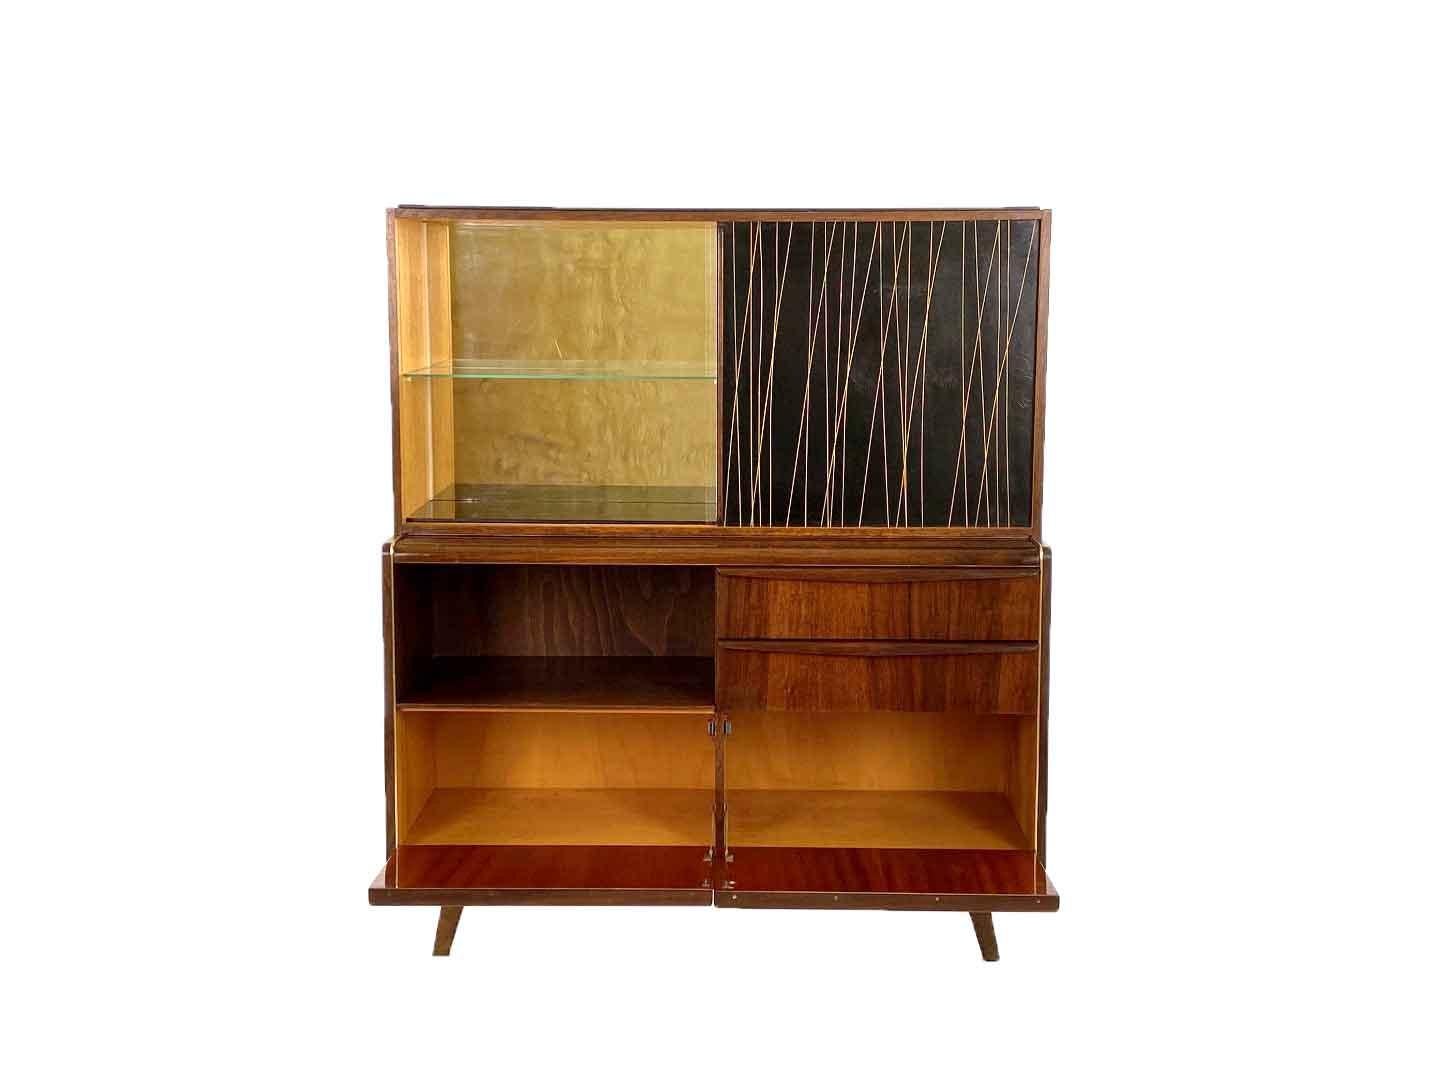 vintage czech design cocktail bar cupboard with showcase designed by bohumil landsman for jitona. produced in the 1960's in the former czechoslovakia. the cocktail bar cupboard is equipped with two drawers on the right side and two flap doors at the